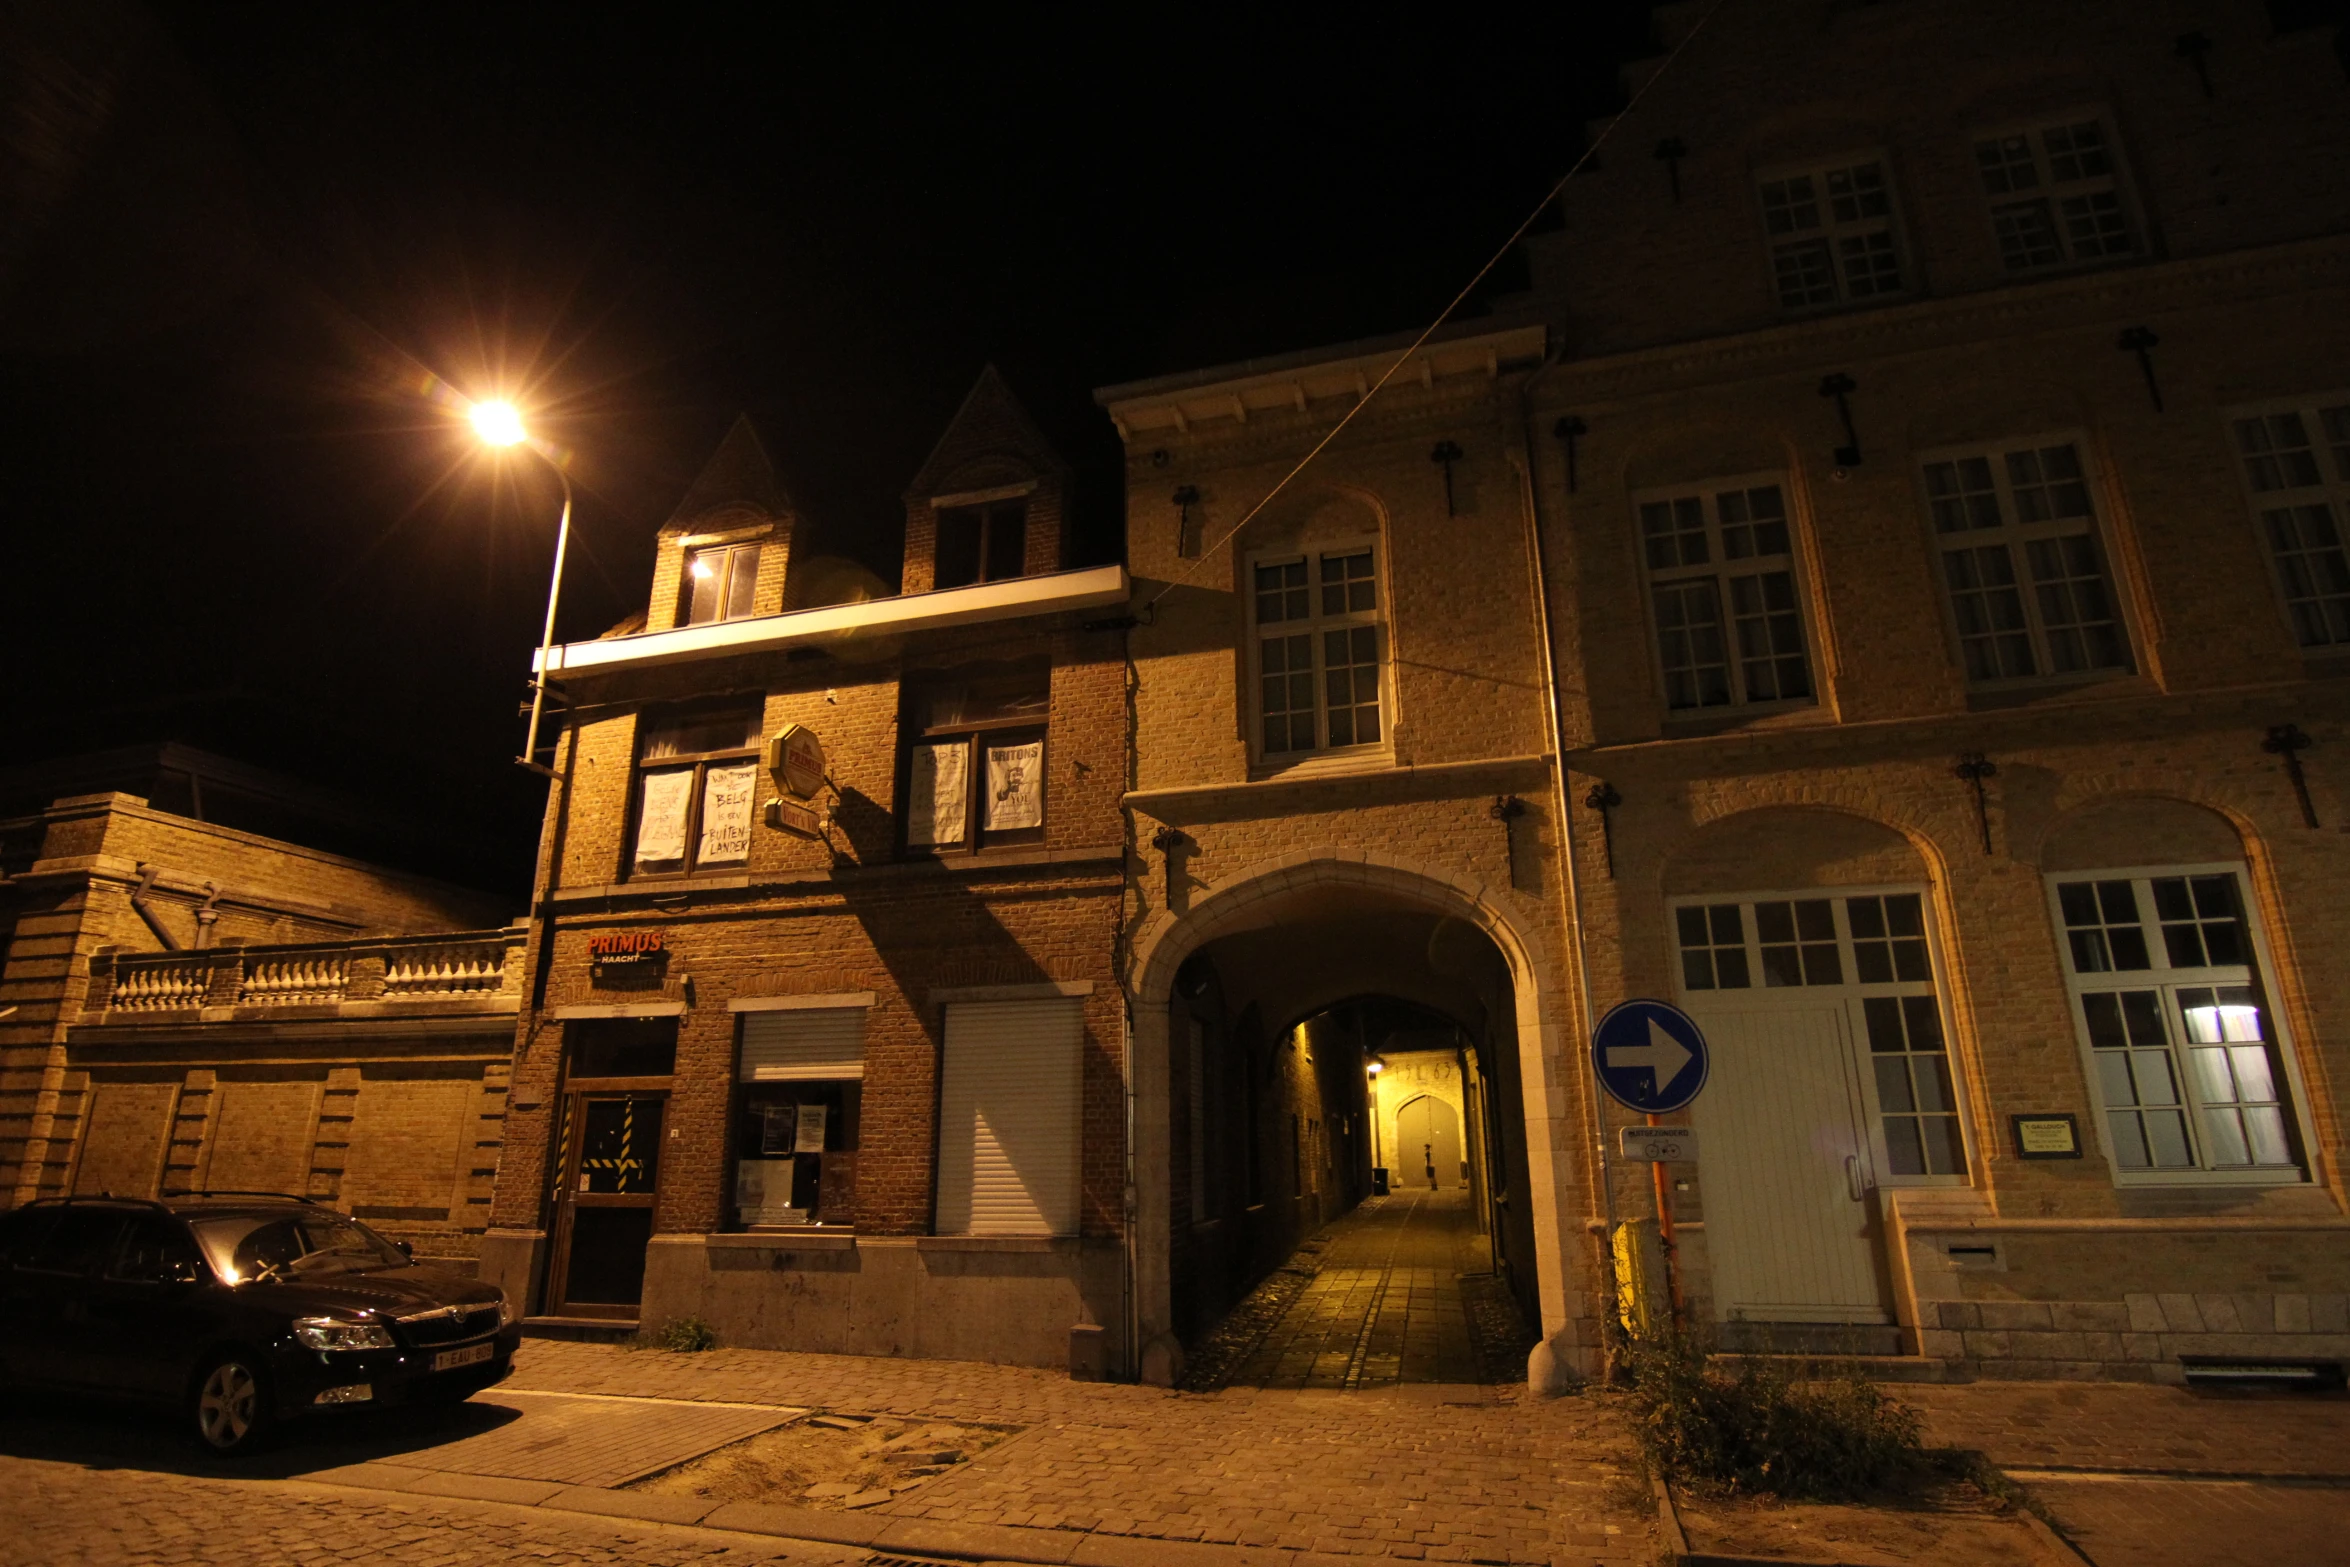 a street side view at night with one car parked on the side and another car out front